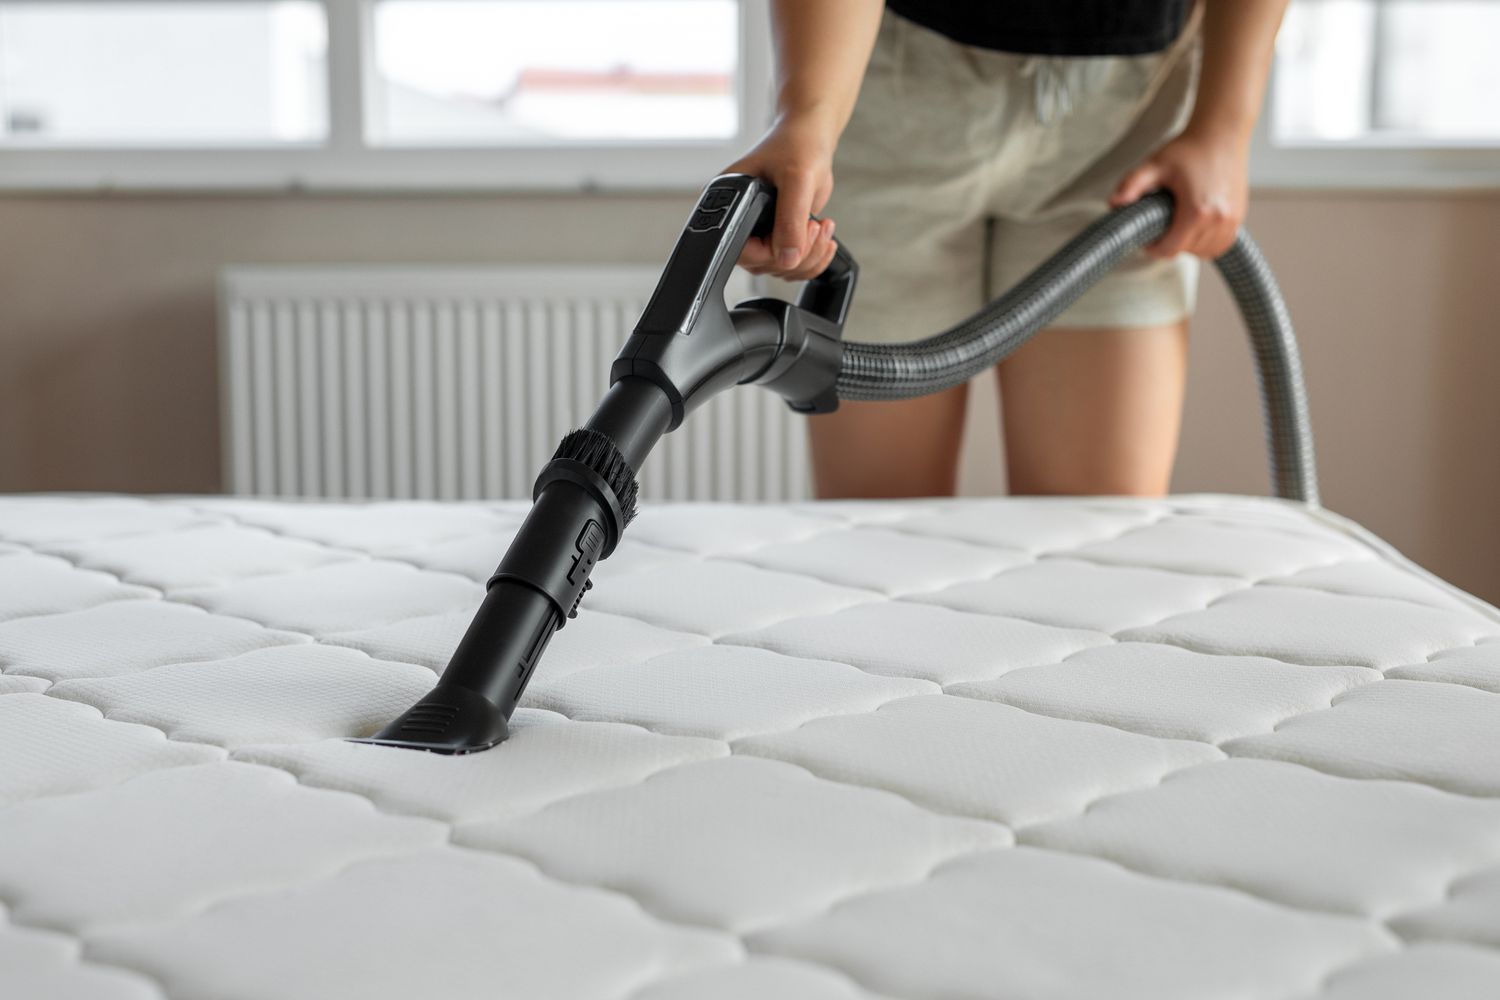 Grab your vacuum cleaner and run it over the mattress to remove dust and other debris